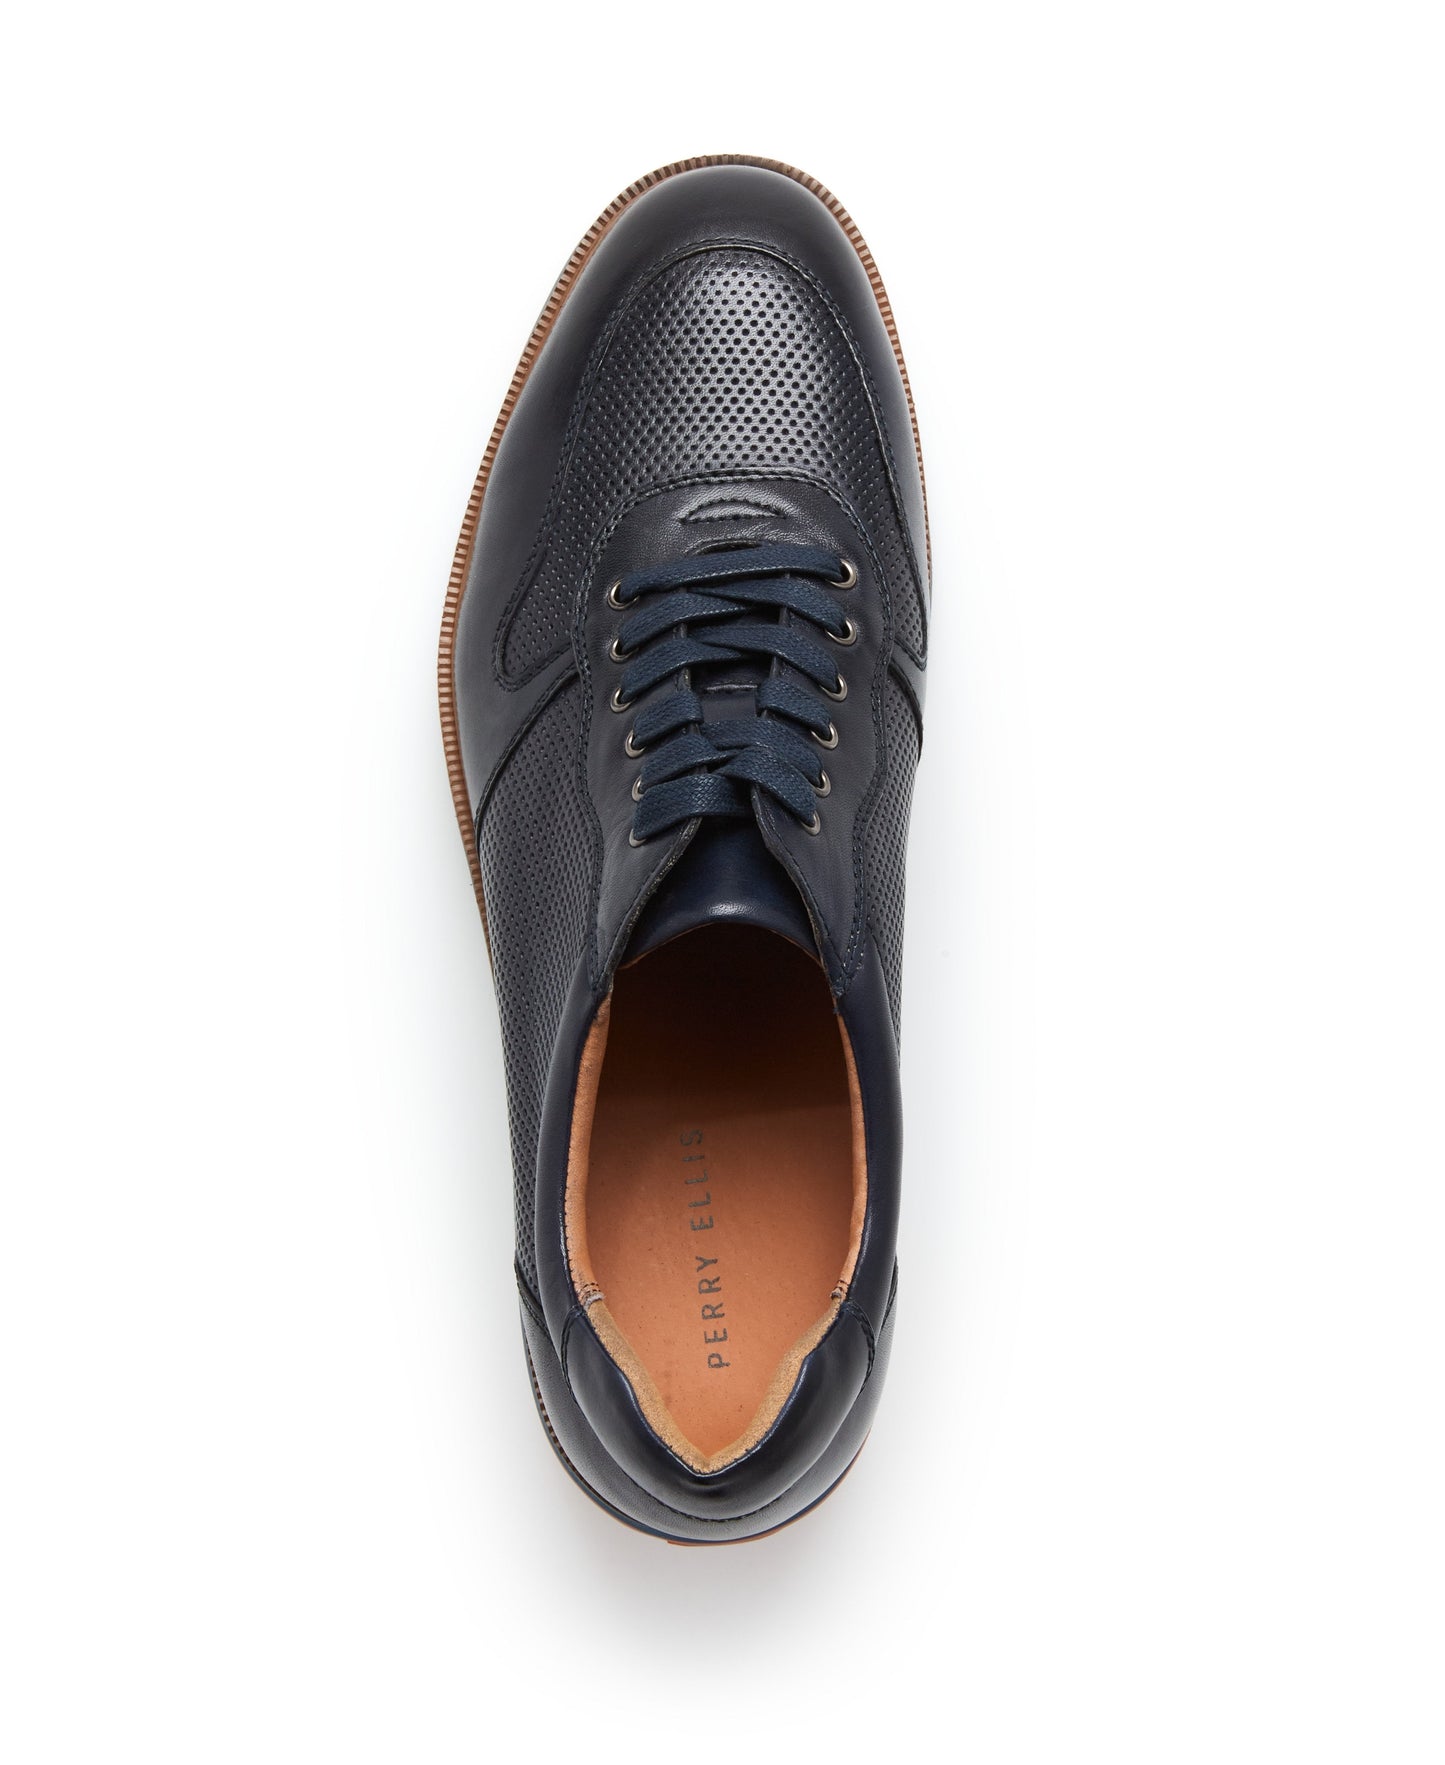 Burnished Leather Oxford Sneaker